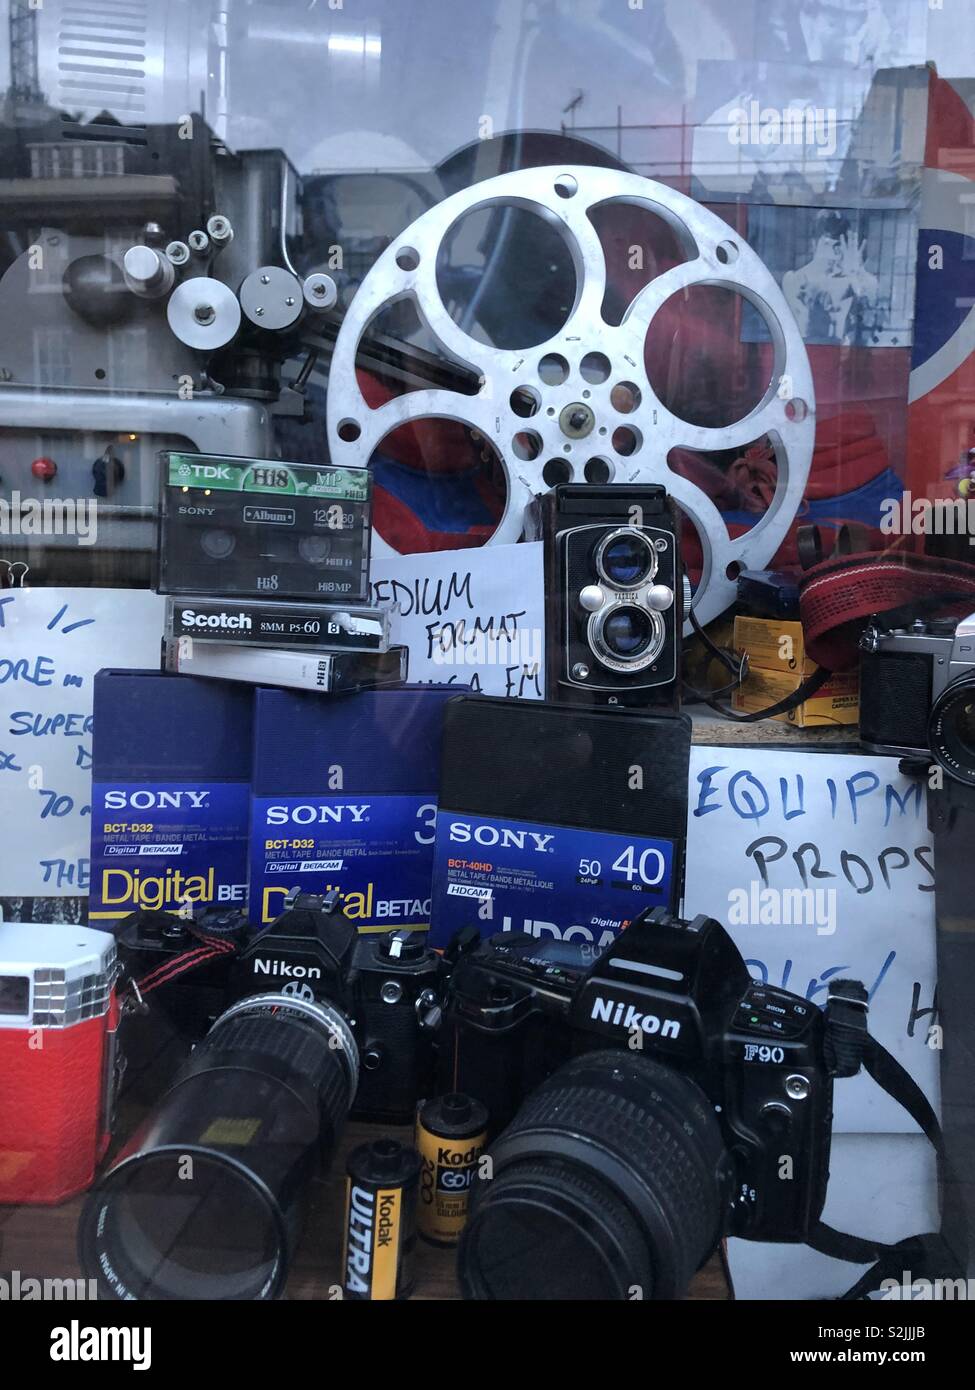 Analog photography equipment and a film reel at a shop window